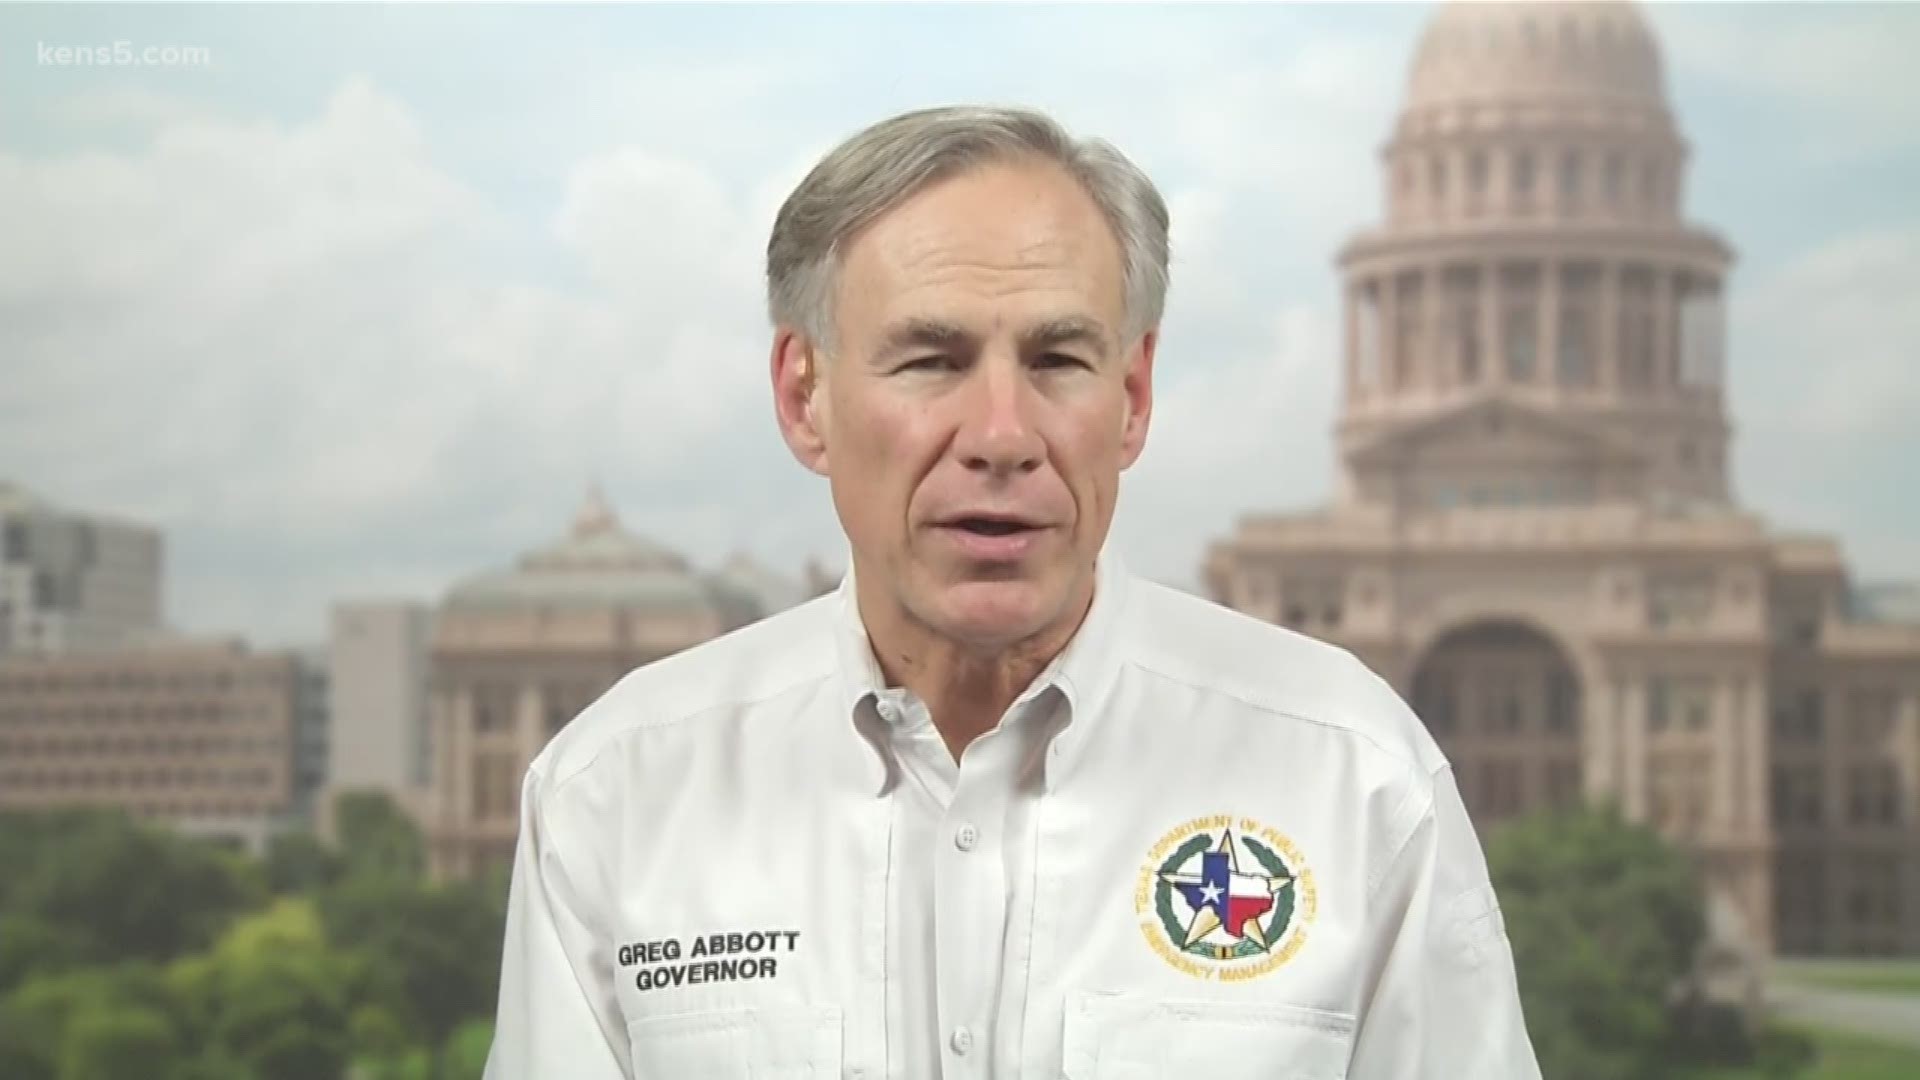 Governor Greg Abbott ordered that any medical procedures not classified as necessary be postponed, in order to help free up healthcare workers.